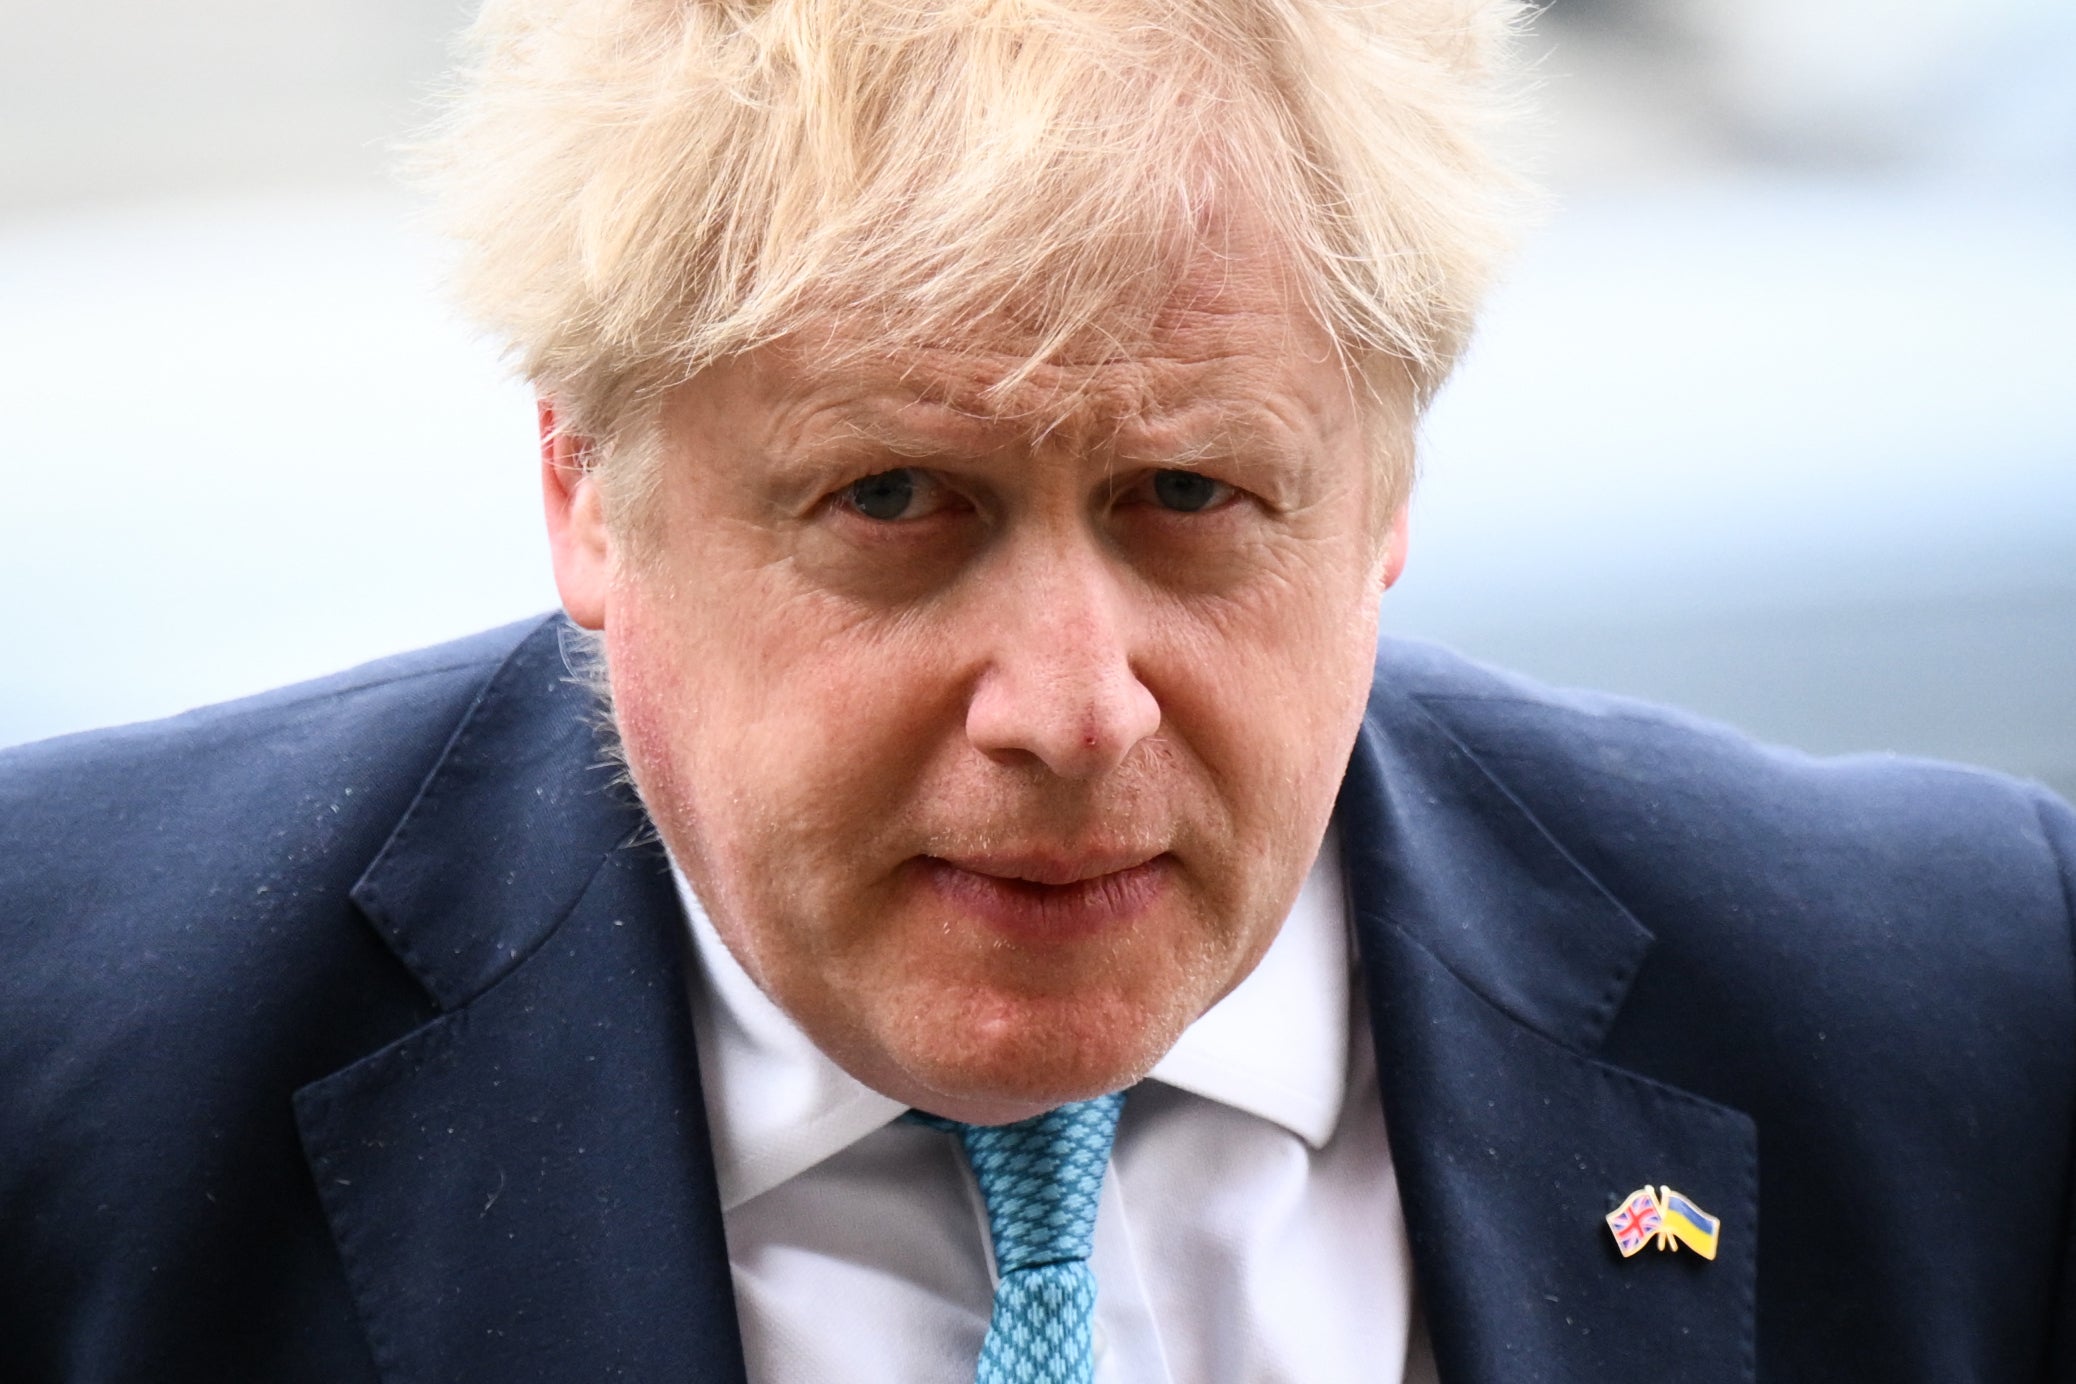 Johnson has made a big scene out of his attendance at the recent march against antisemitism